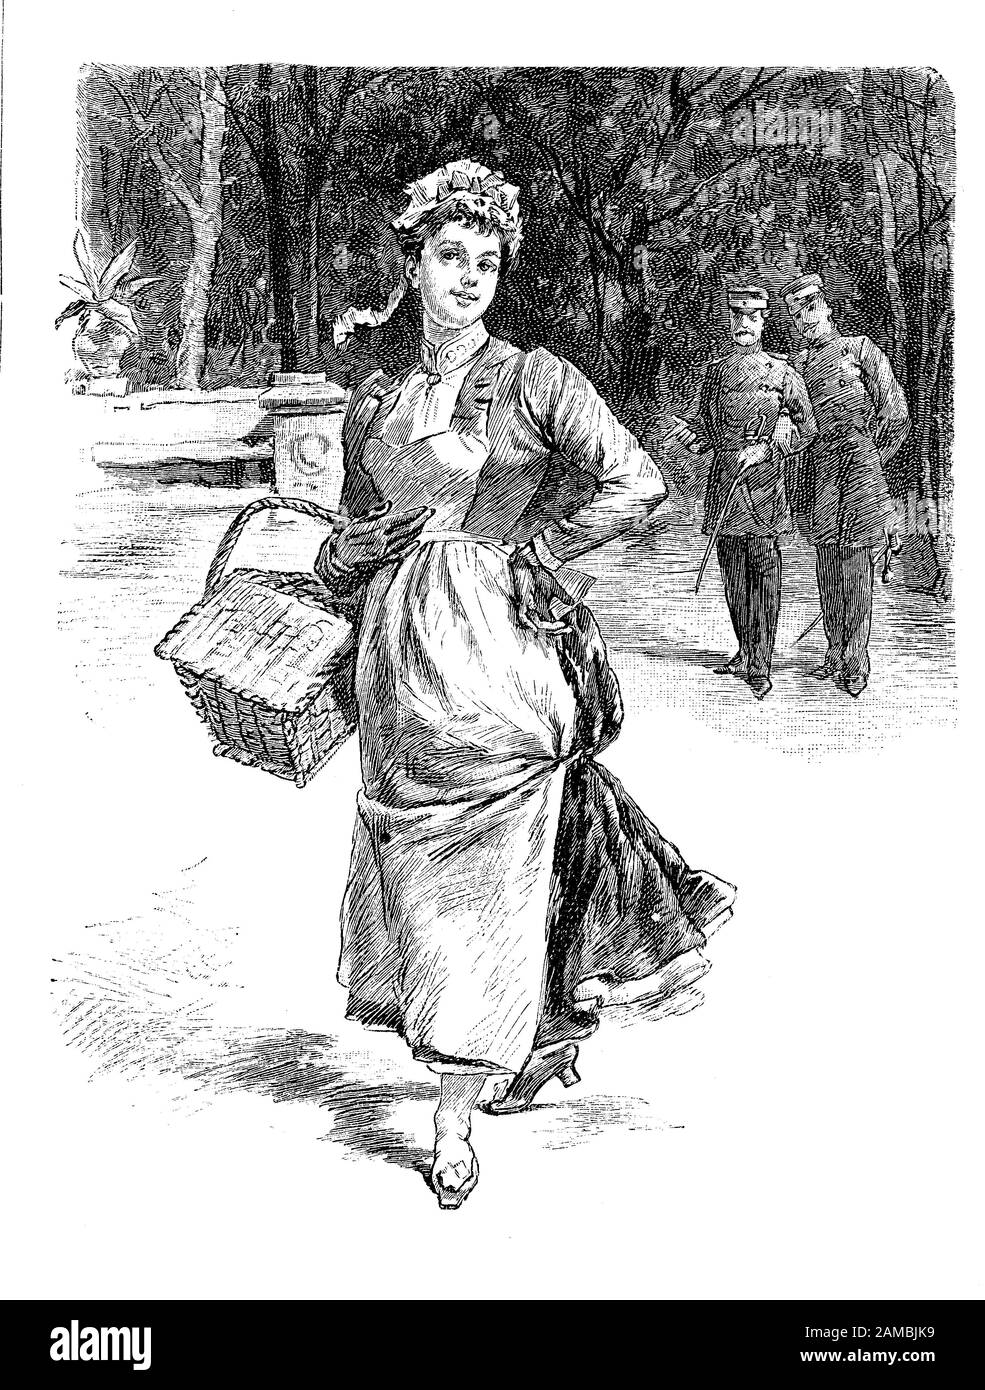 German satirical magazine, humor and caricatures: two proud officers with elegant uniforms and waxed moustaches look appreciatively at  a young and chipper maid walking conscious in the park Stock Photo